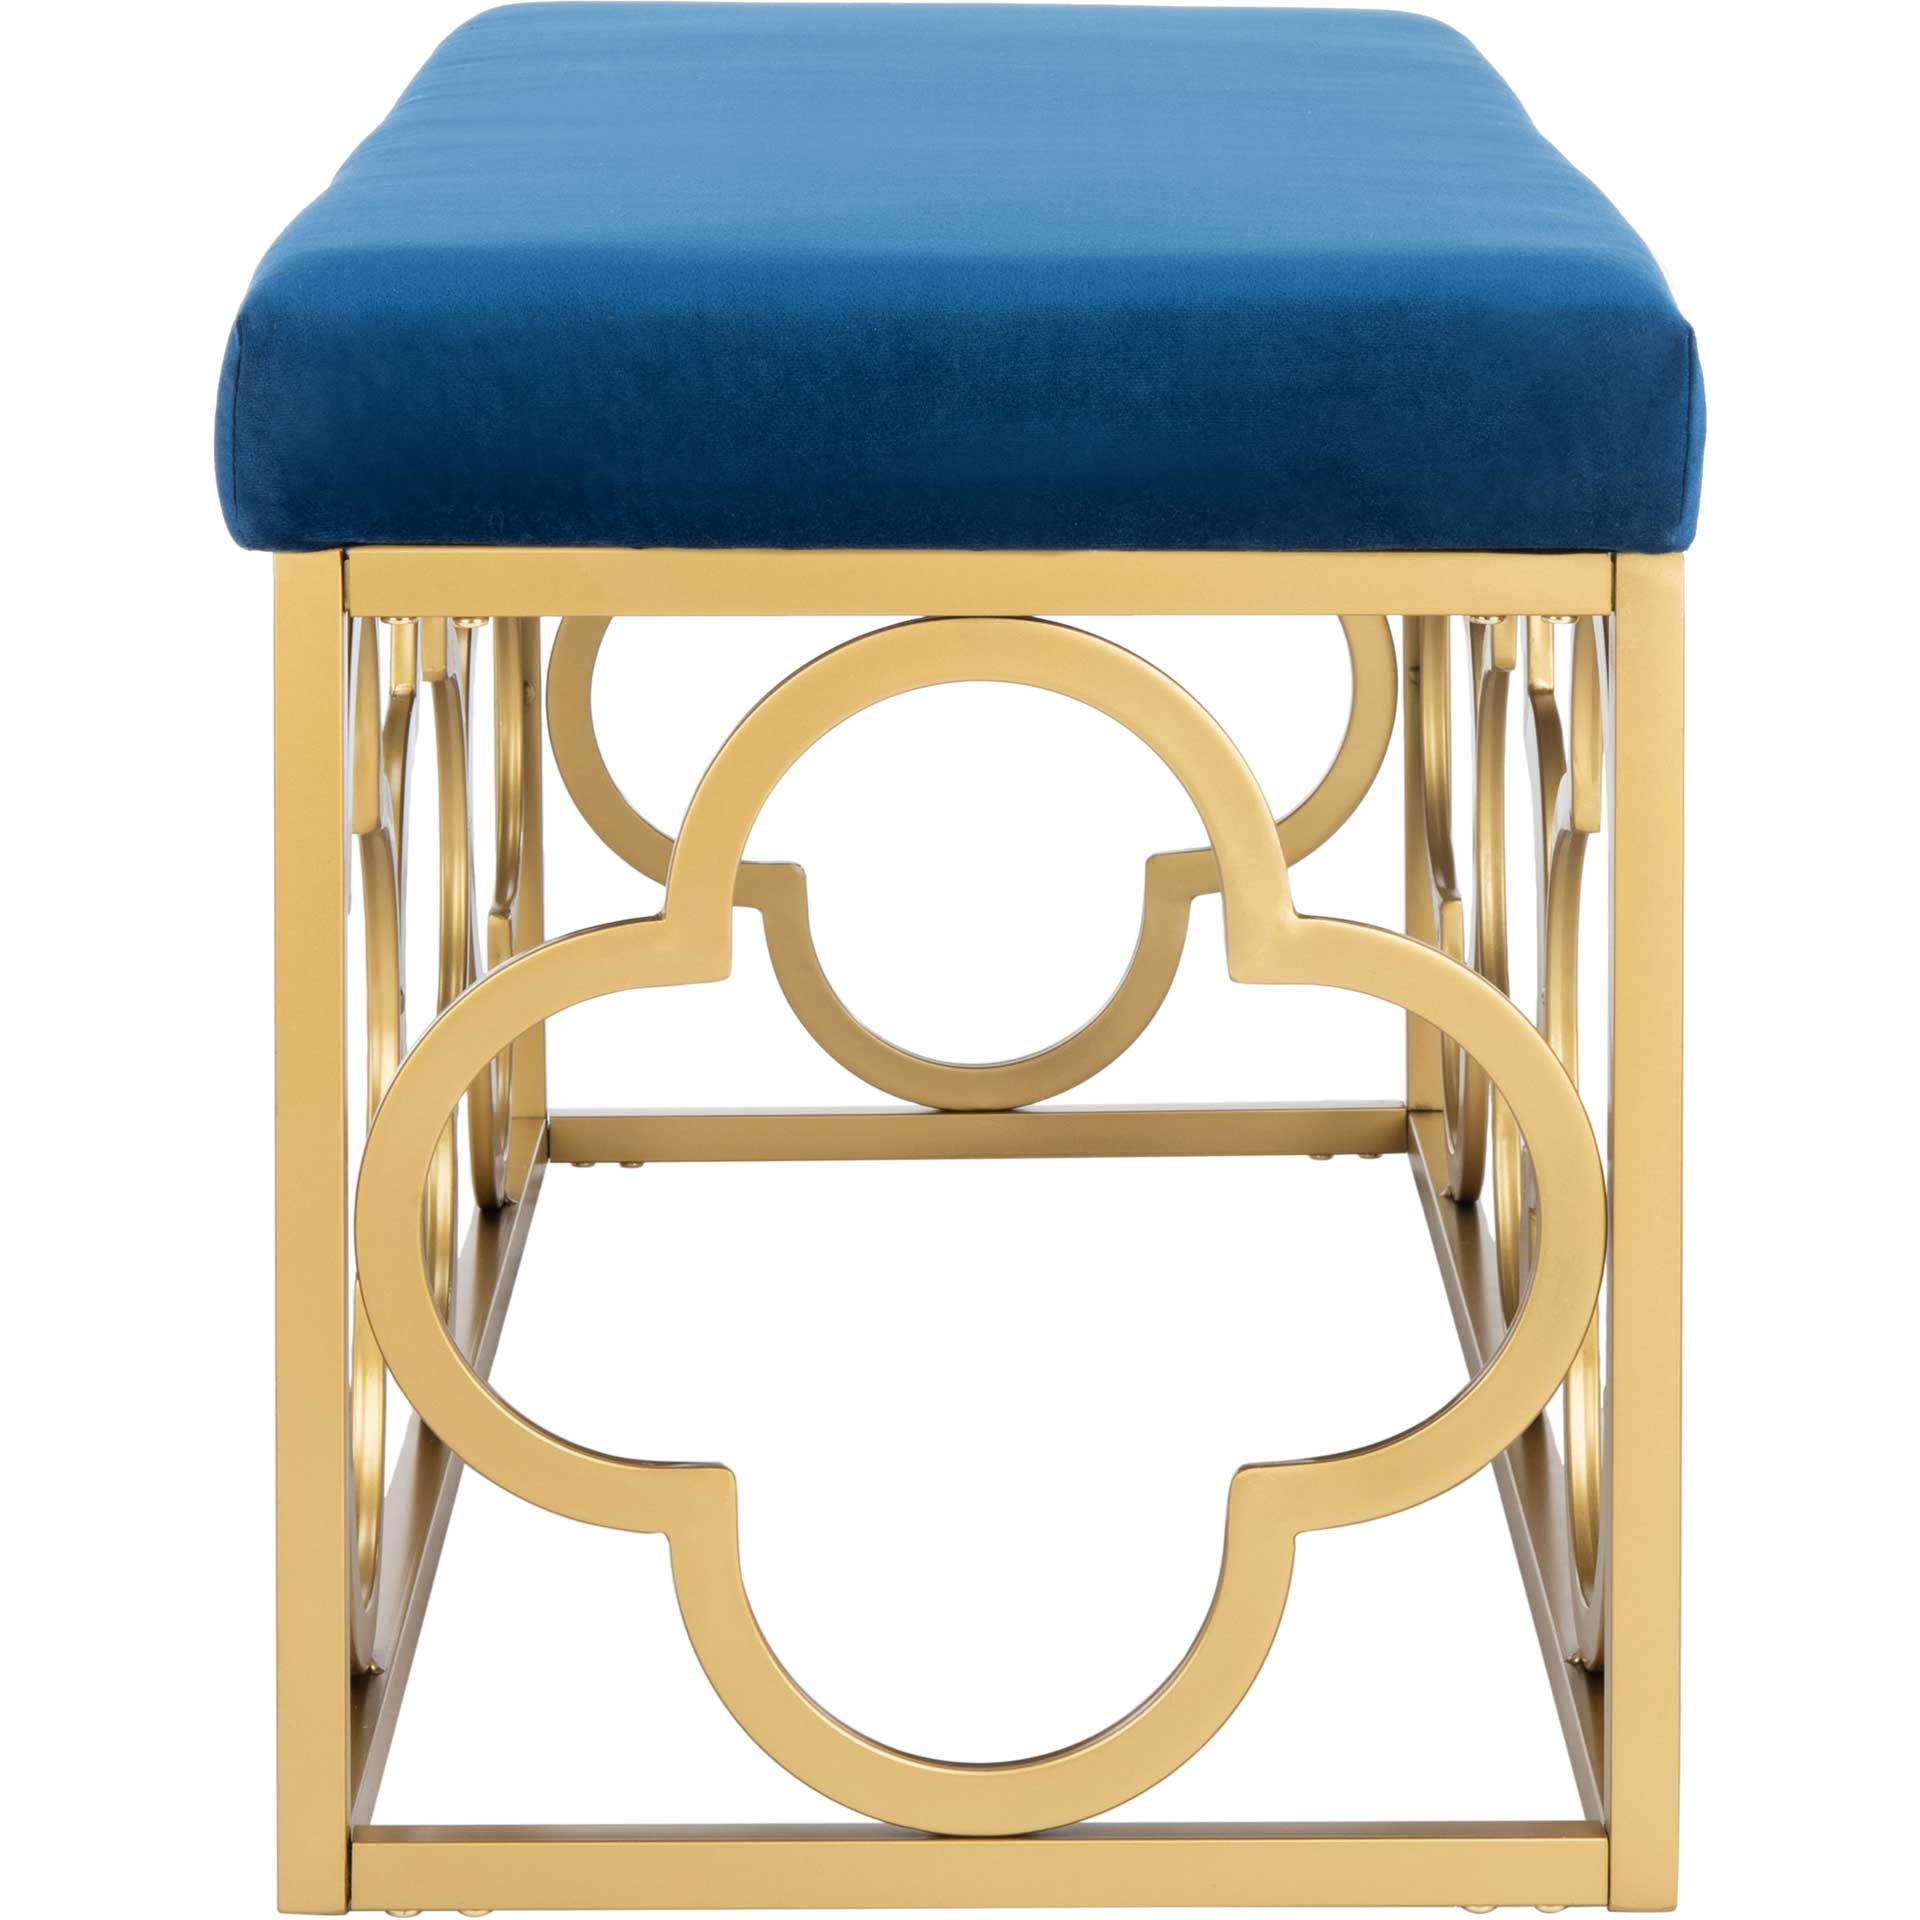 Florence Rectangle Bench Navy/Gold